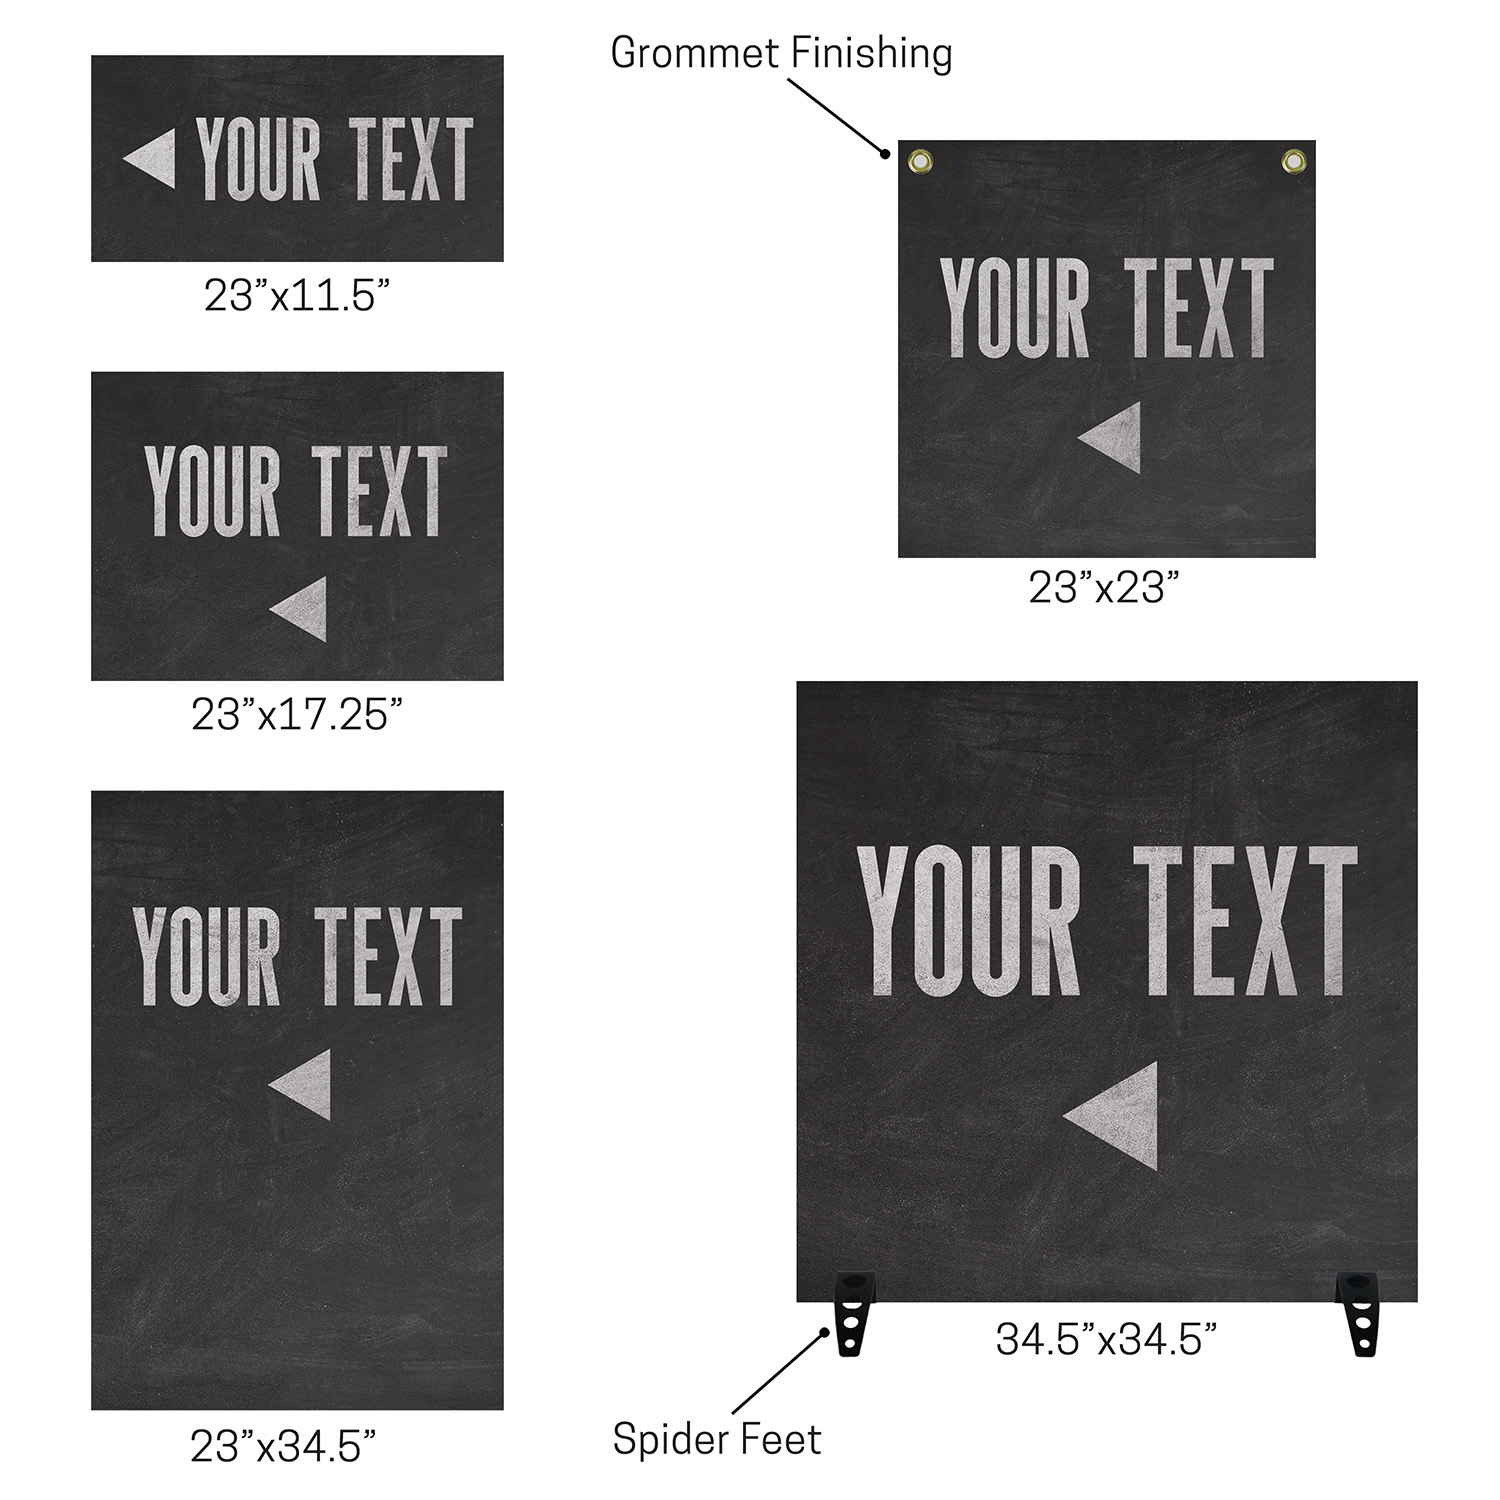 Rigid Signs, General Blue Your Text, 23 x 11.5 2